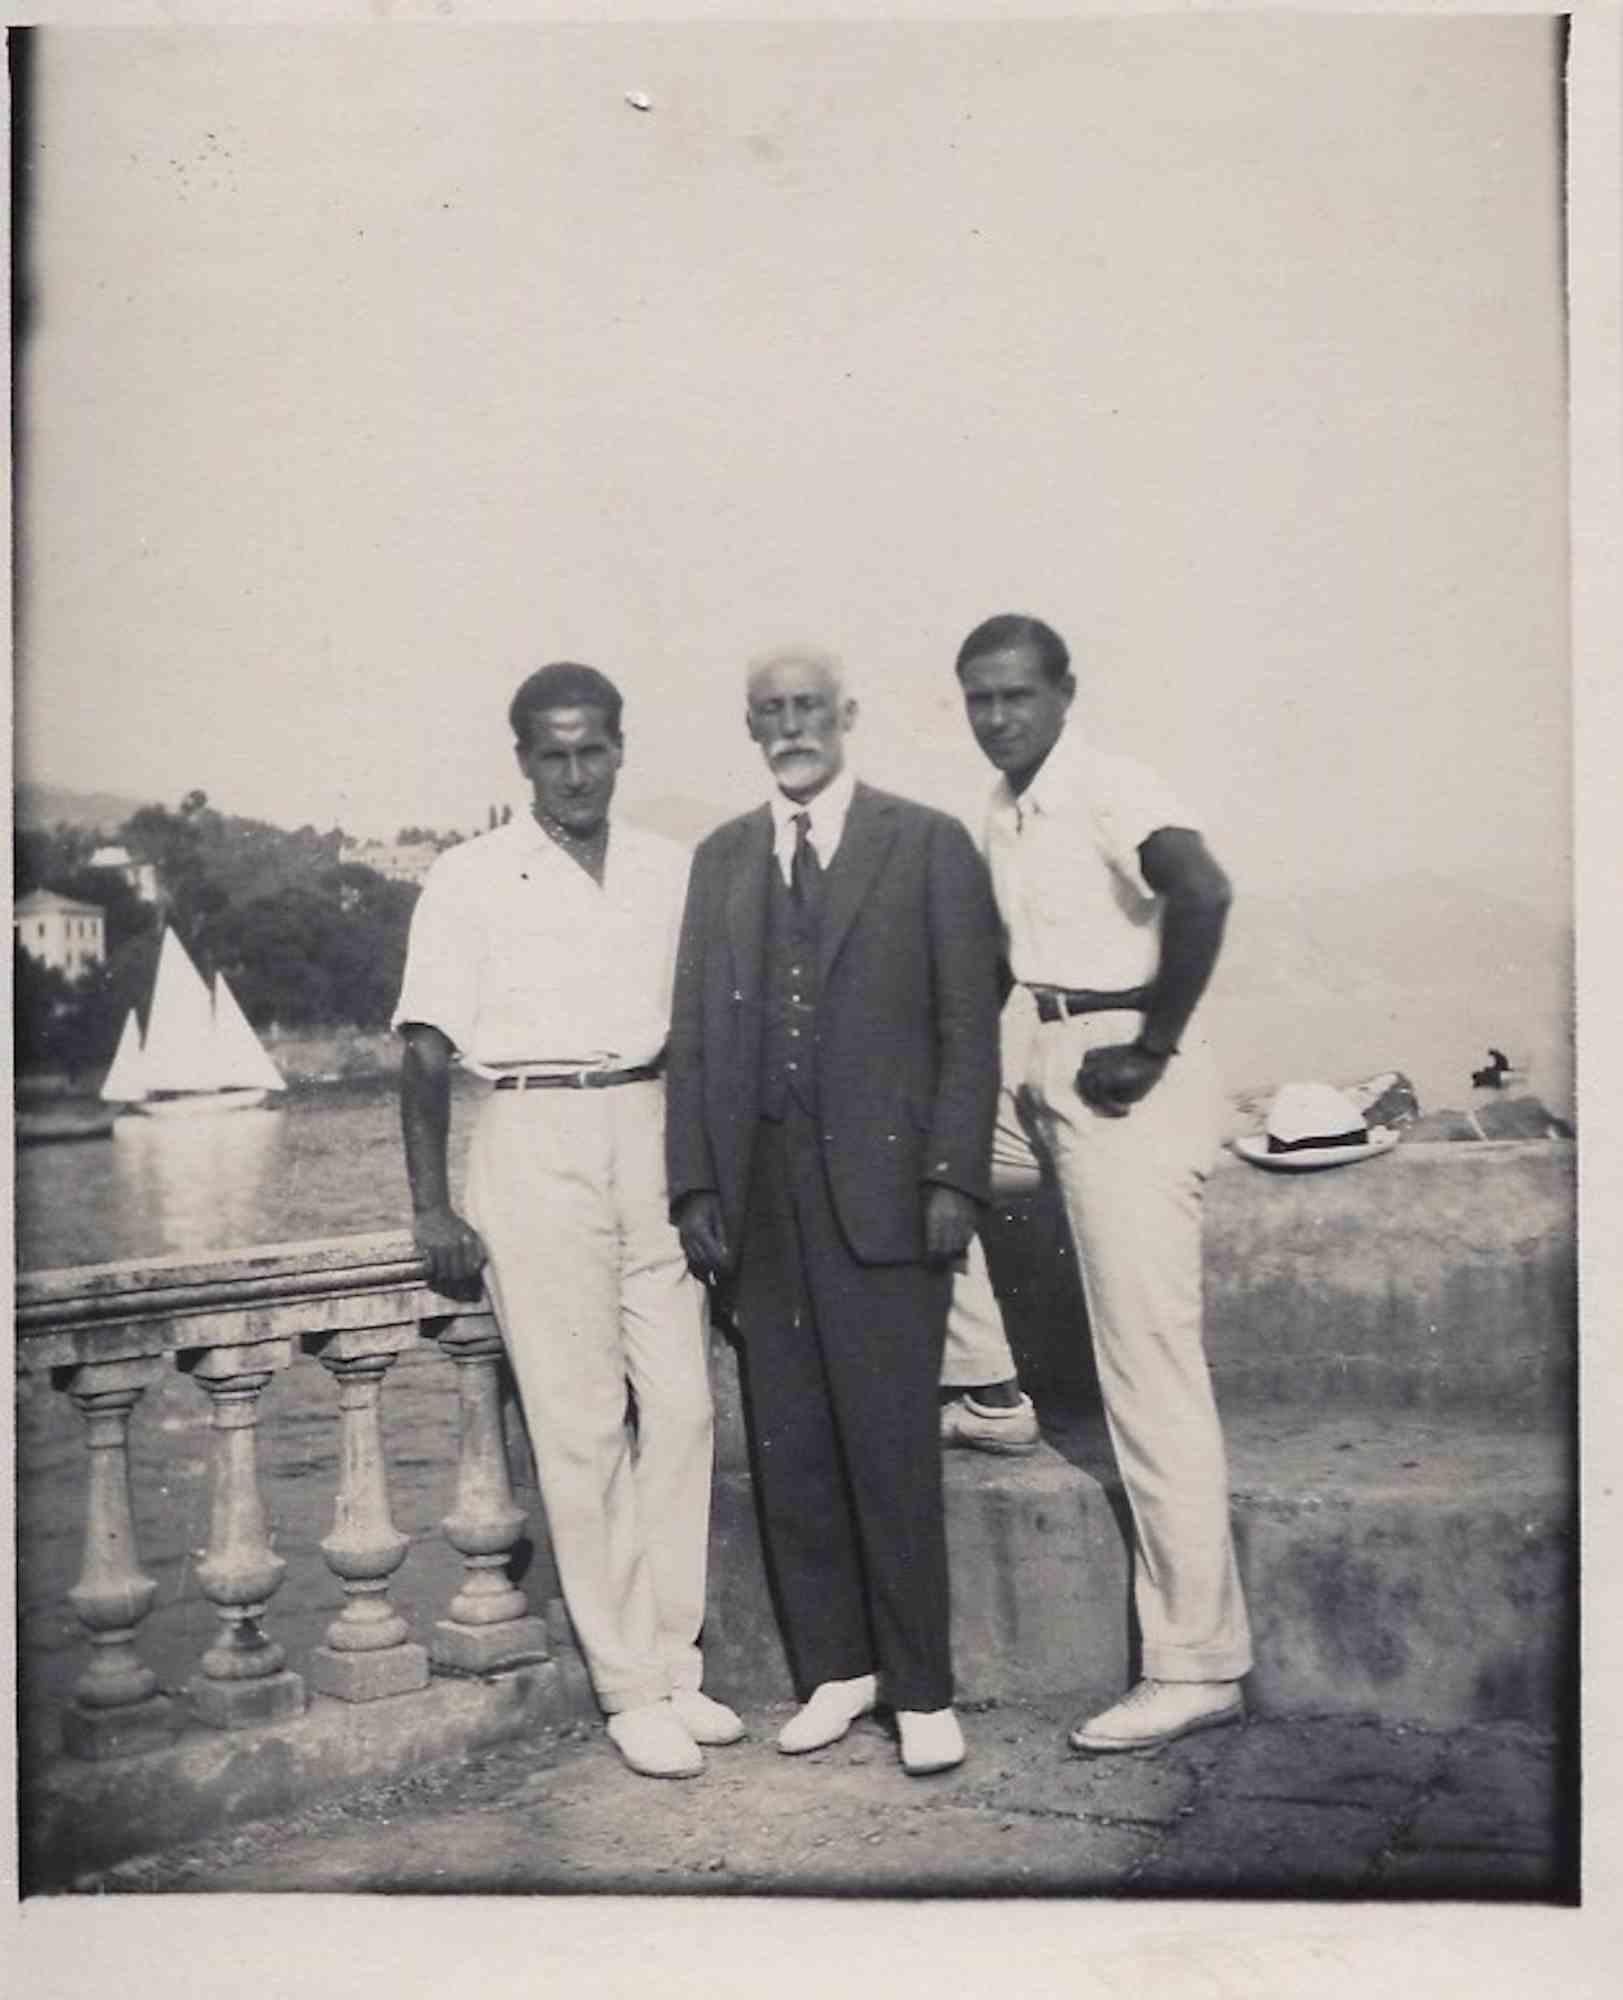 Unknown Landscape Photograph - Old days Photo - Painter Carlo Ferrari and Friends - Photo - Early 20th Century